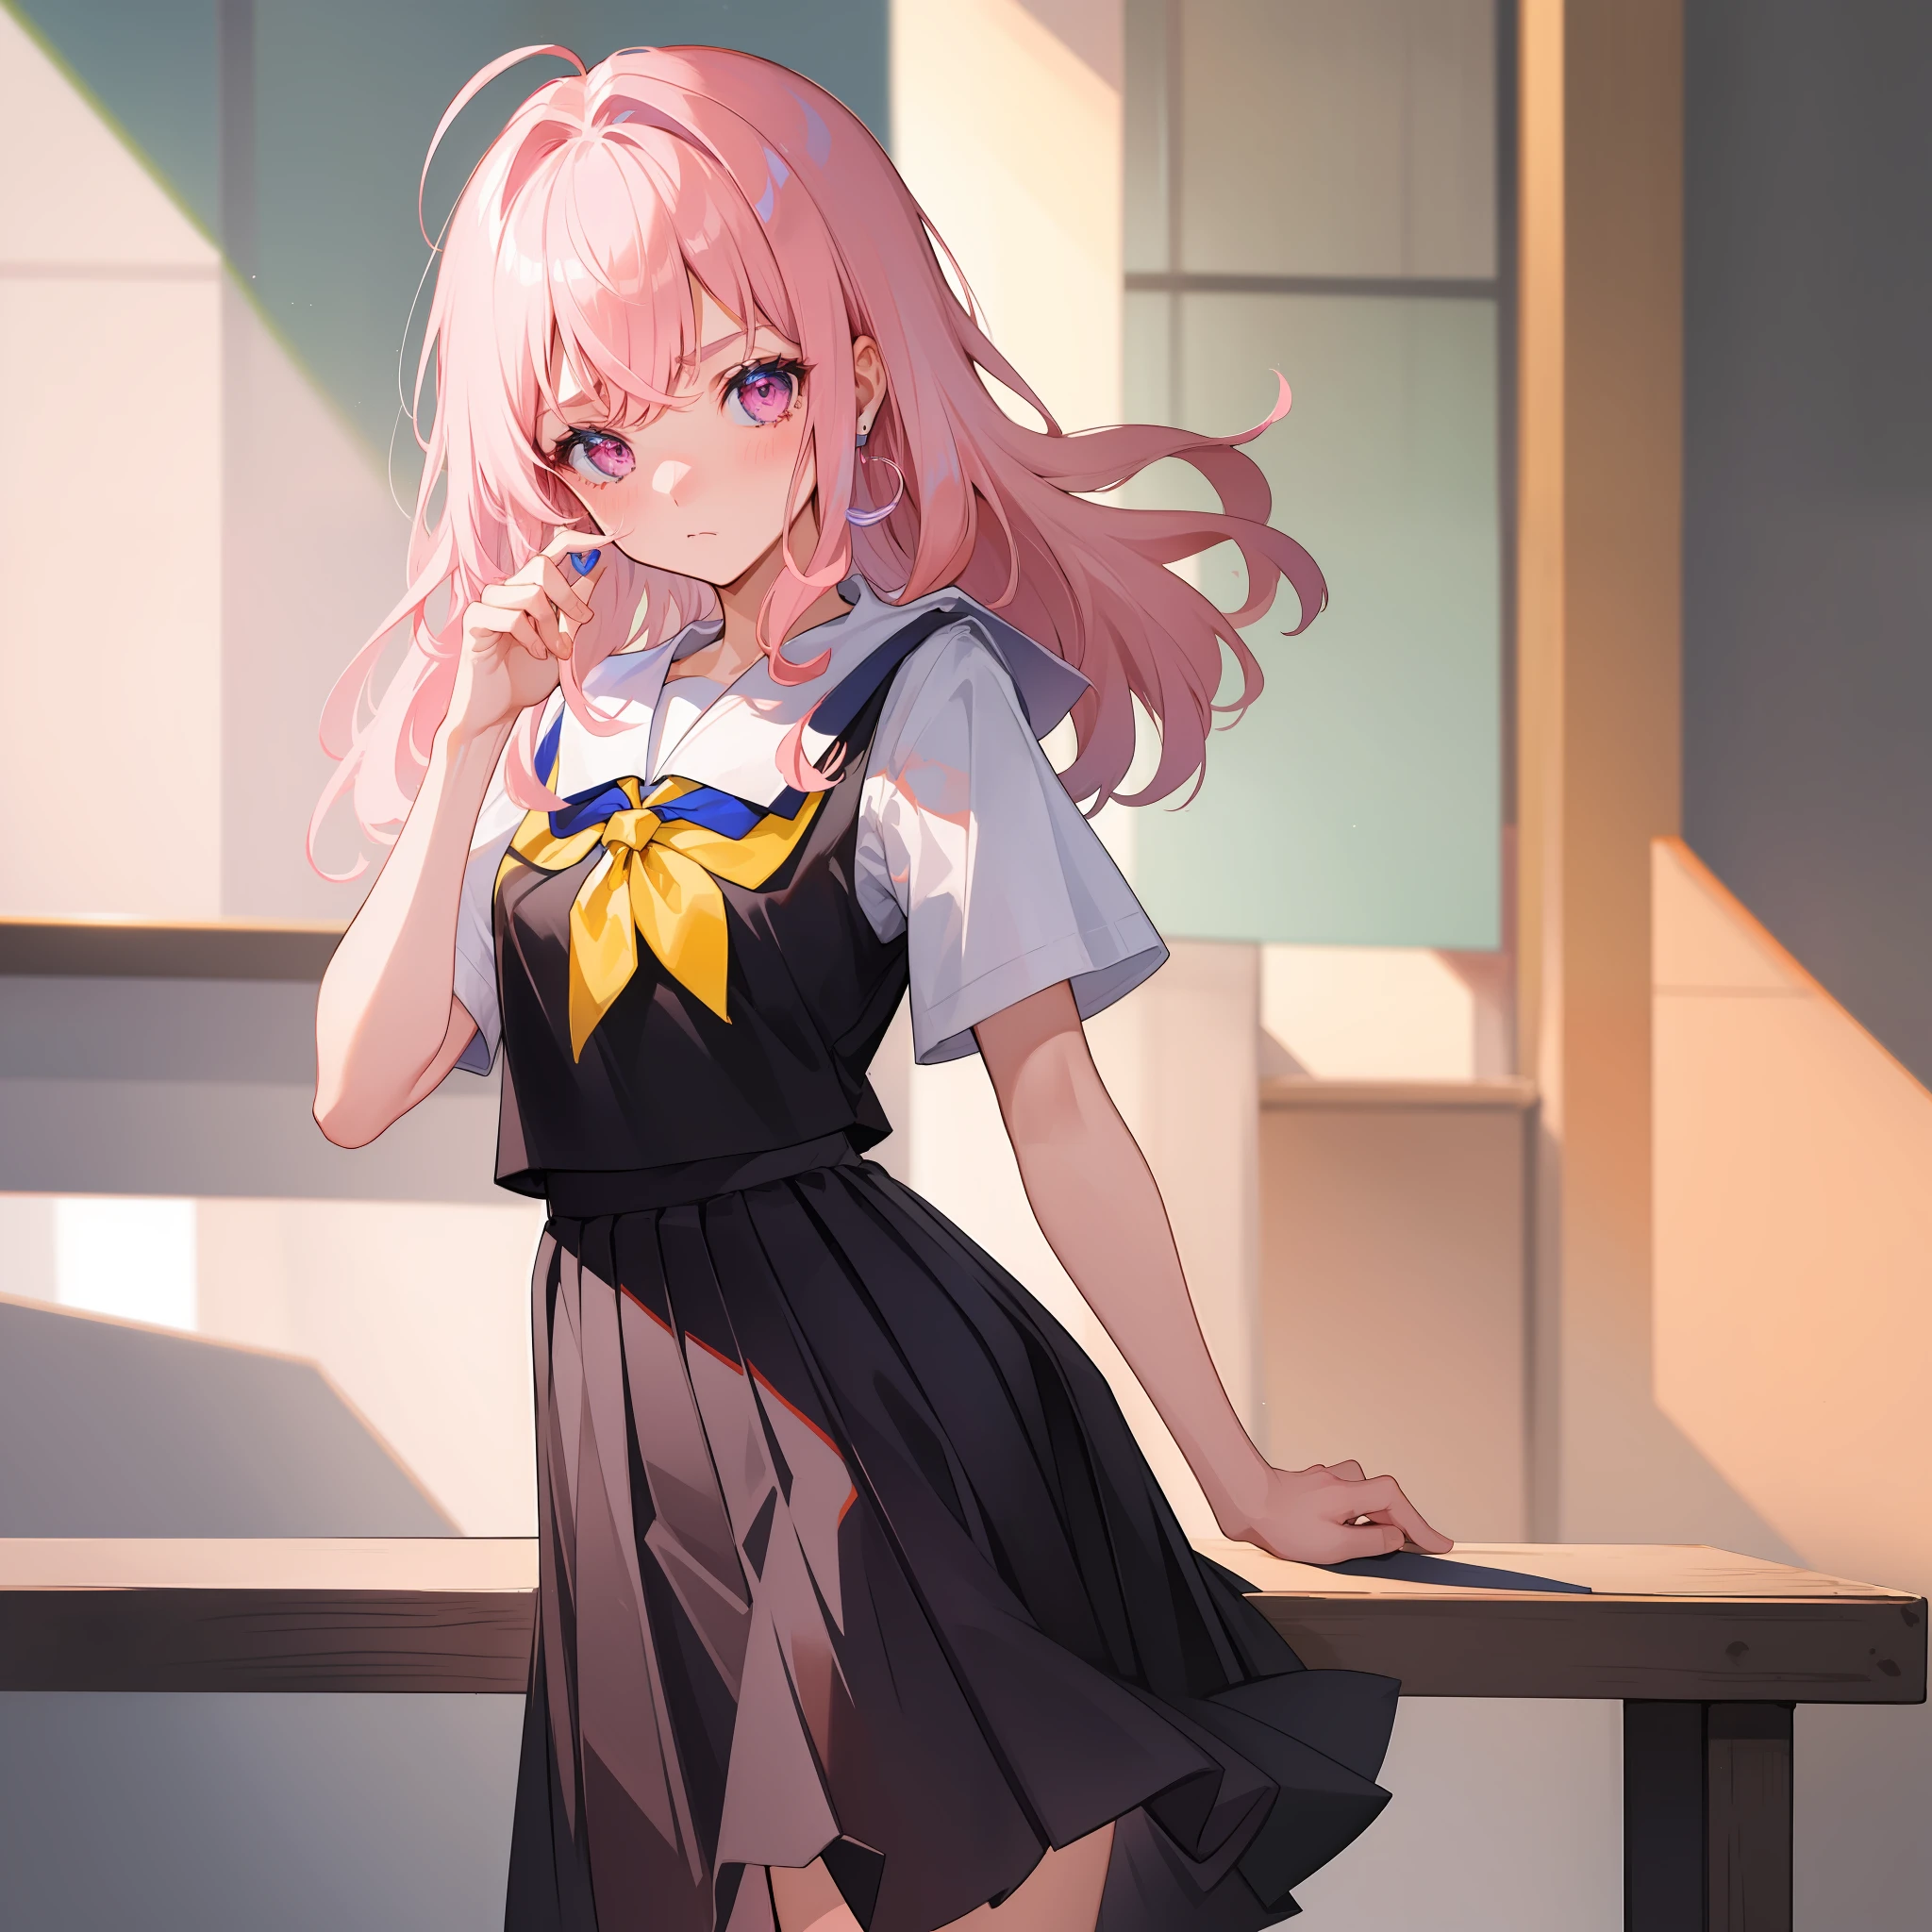 (Masterpiece), ((Best Quality)), (Super Detail), 1 Girl, Pink Hair, Small, Short Sture, Medium Long Hair, Ahoge, School, Classroom, 14 years old, , Skirt, Socks, Serafuk, Neckerchief, Sailor Color, Pleated Skirt, White Socks, Blue Skirt, Short Sleeve, Shirt, White Shirt, Blue Sailor Color, Blue Neckerchief ,, Blush, Bangs, Frown, Pink Eyes, perfect hand, hand detail, modified fingers. earrings, looking_at_viewer, top quality, rich details, perfect image quality,